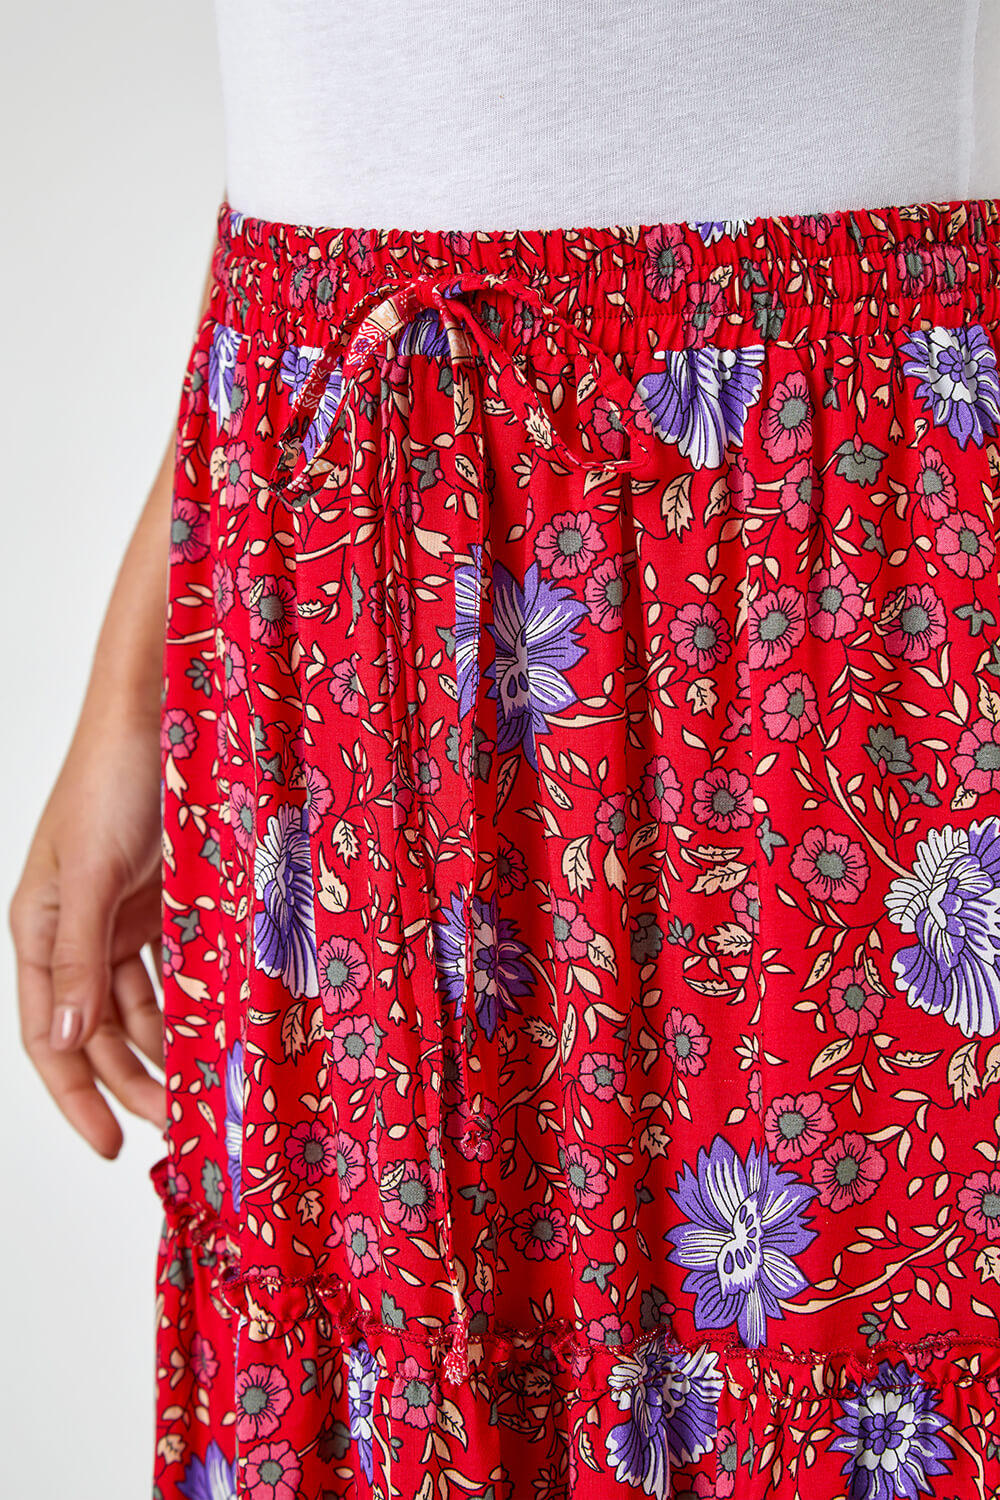 Red Boho Floral Print Tiered Maxi Skirt, Image 5 of 5